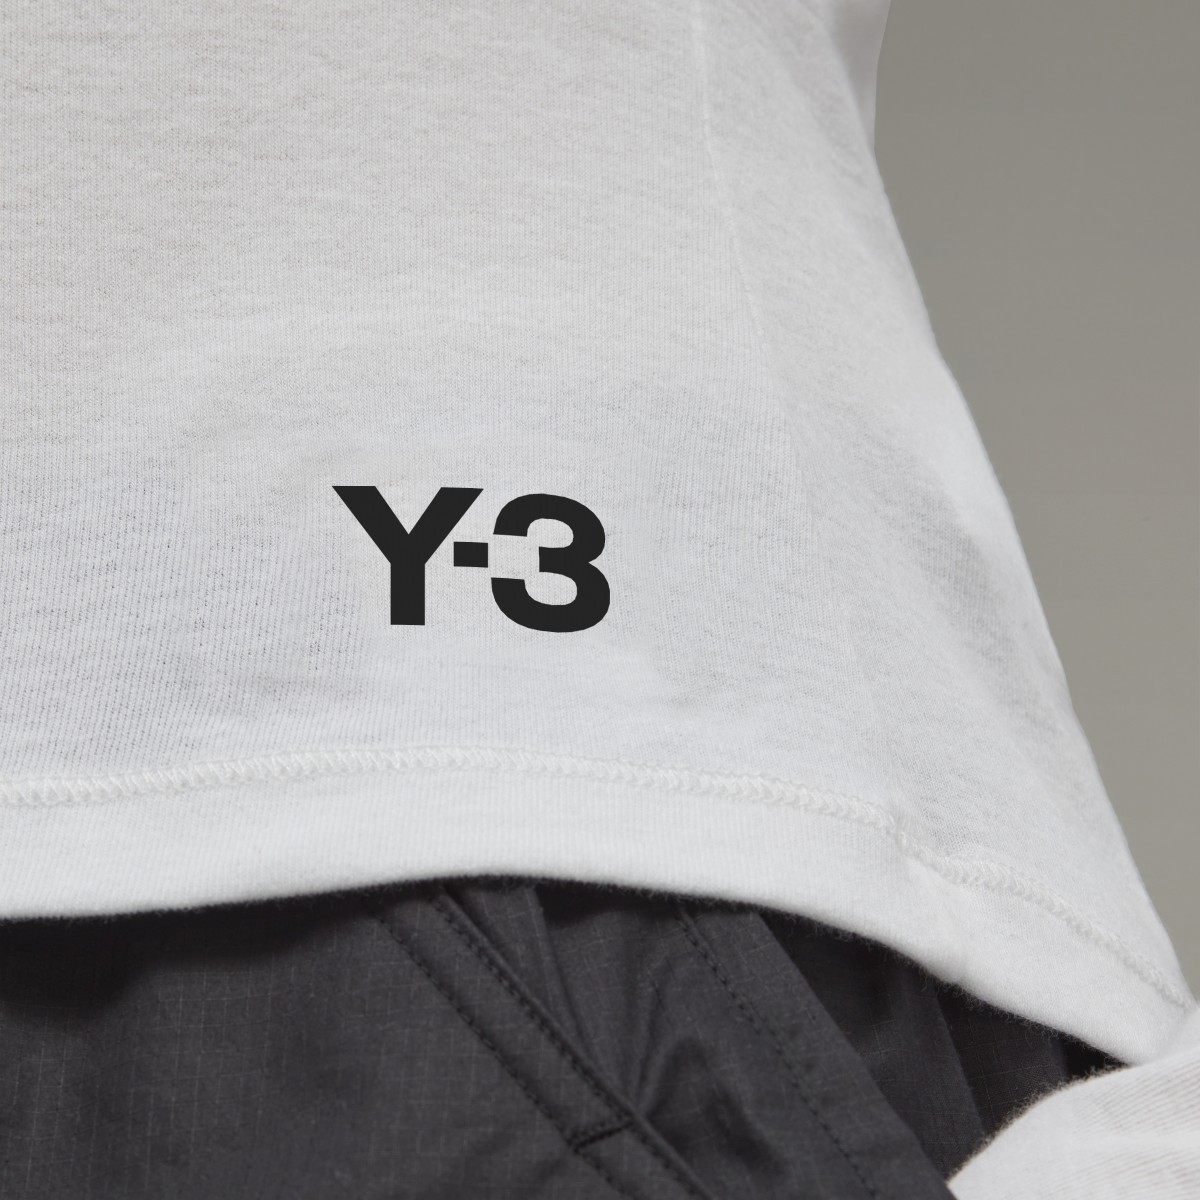 Adidas Y-3 Fitted Long-Sleeve Top. 6